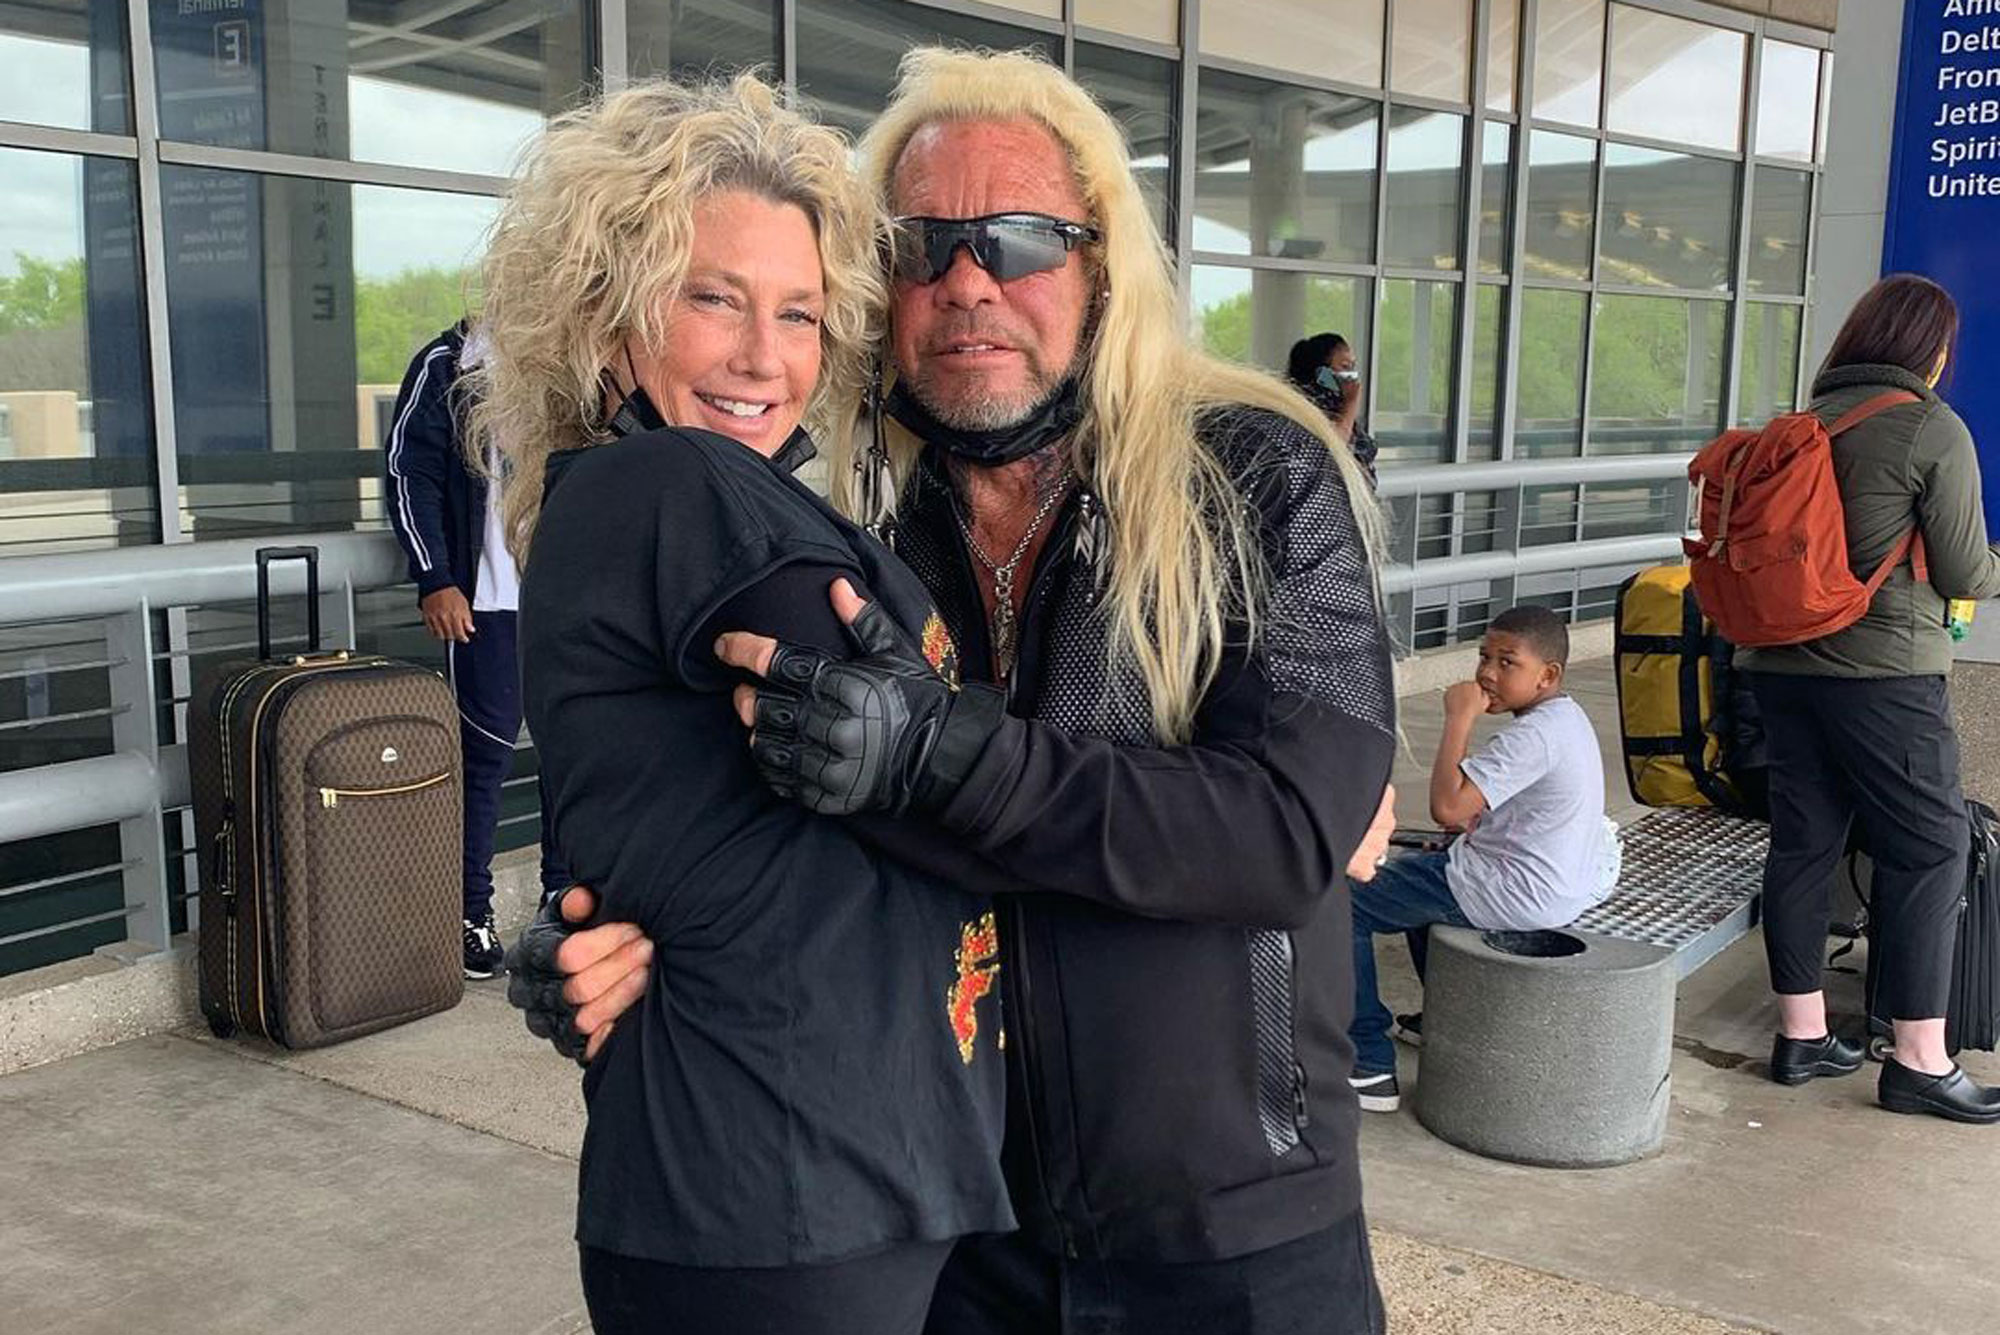 Dog The Bounty Hunter: What Happened To Duane Chapman After The Show